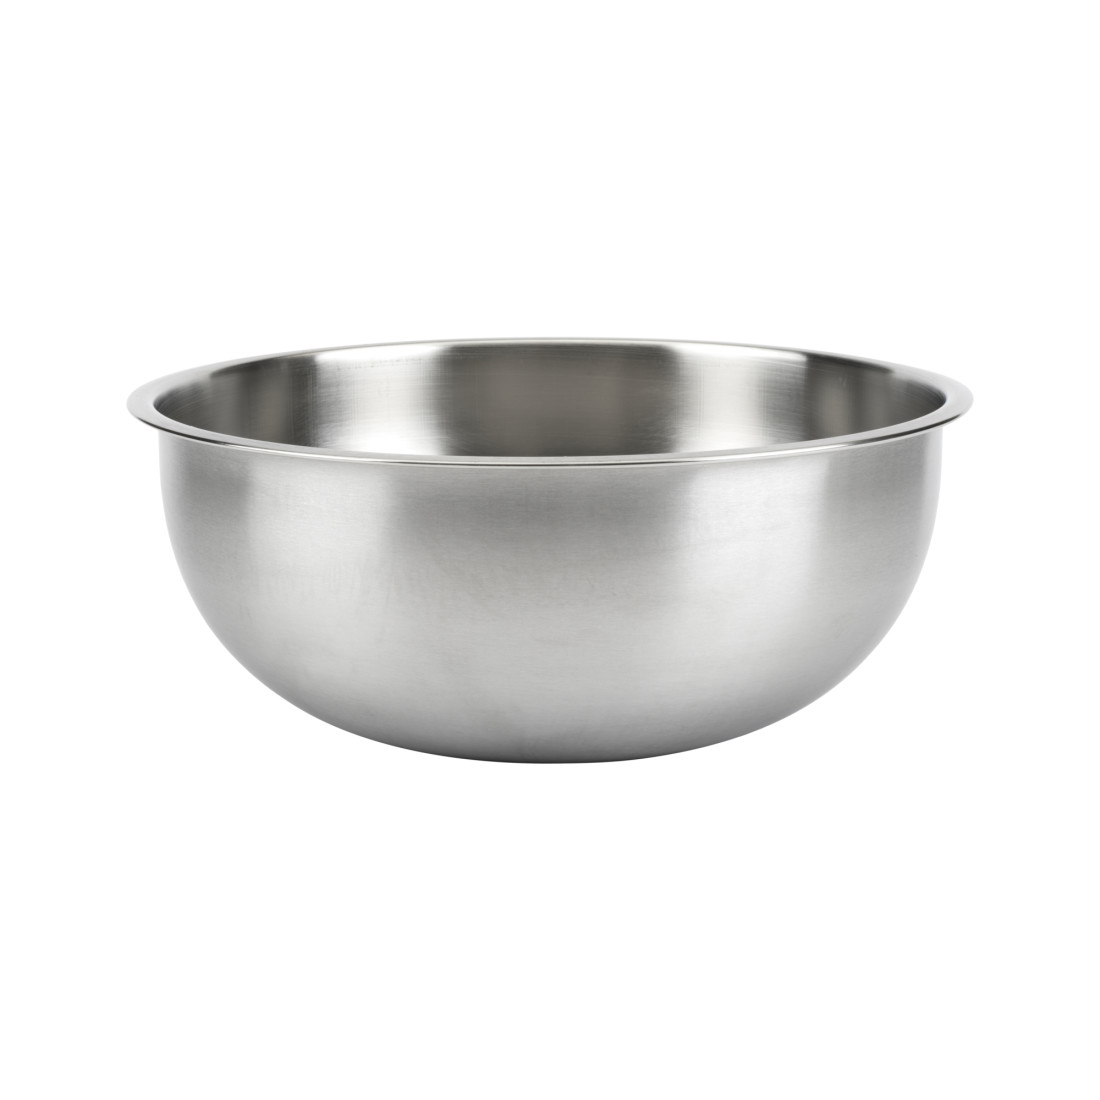 8qt Stainless Steel Bowl